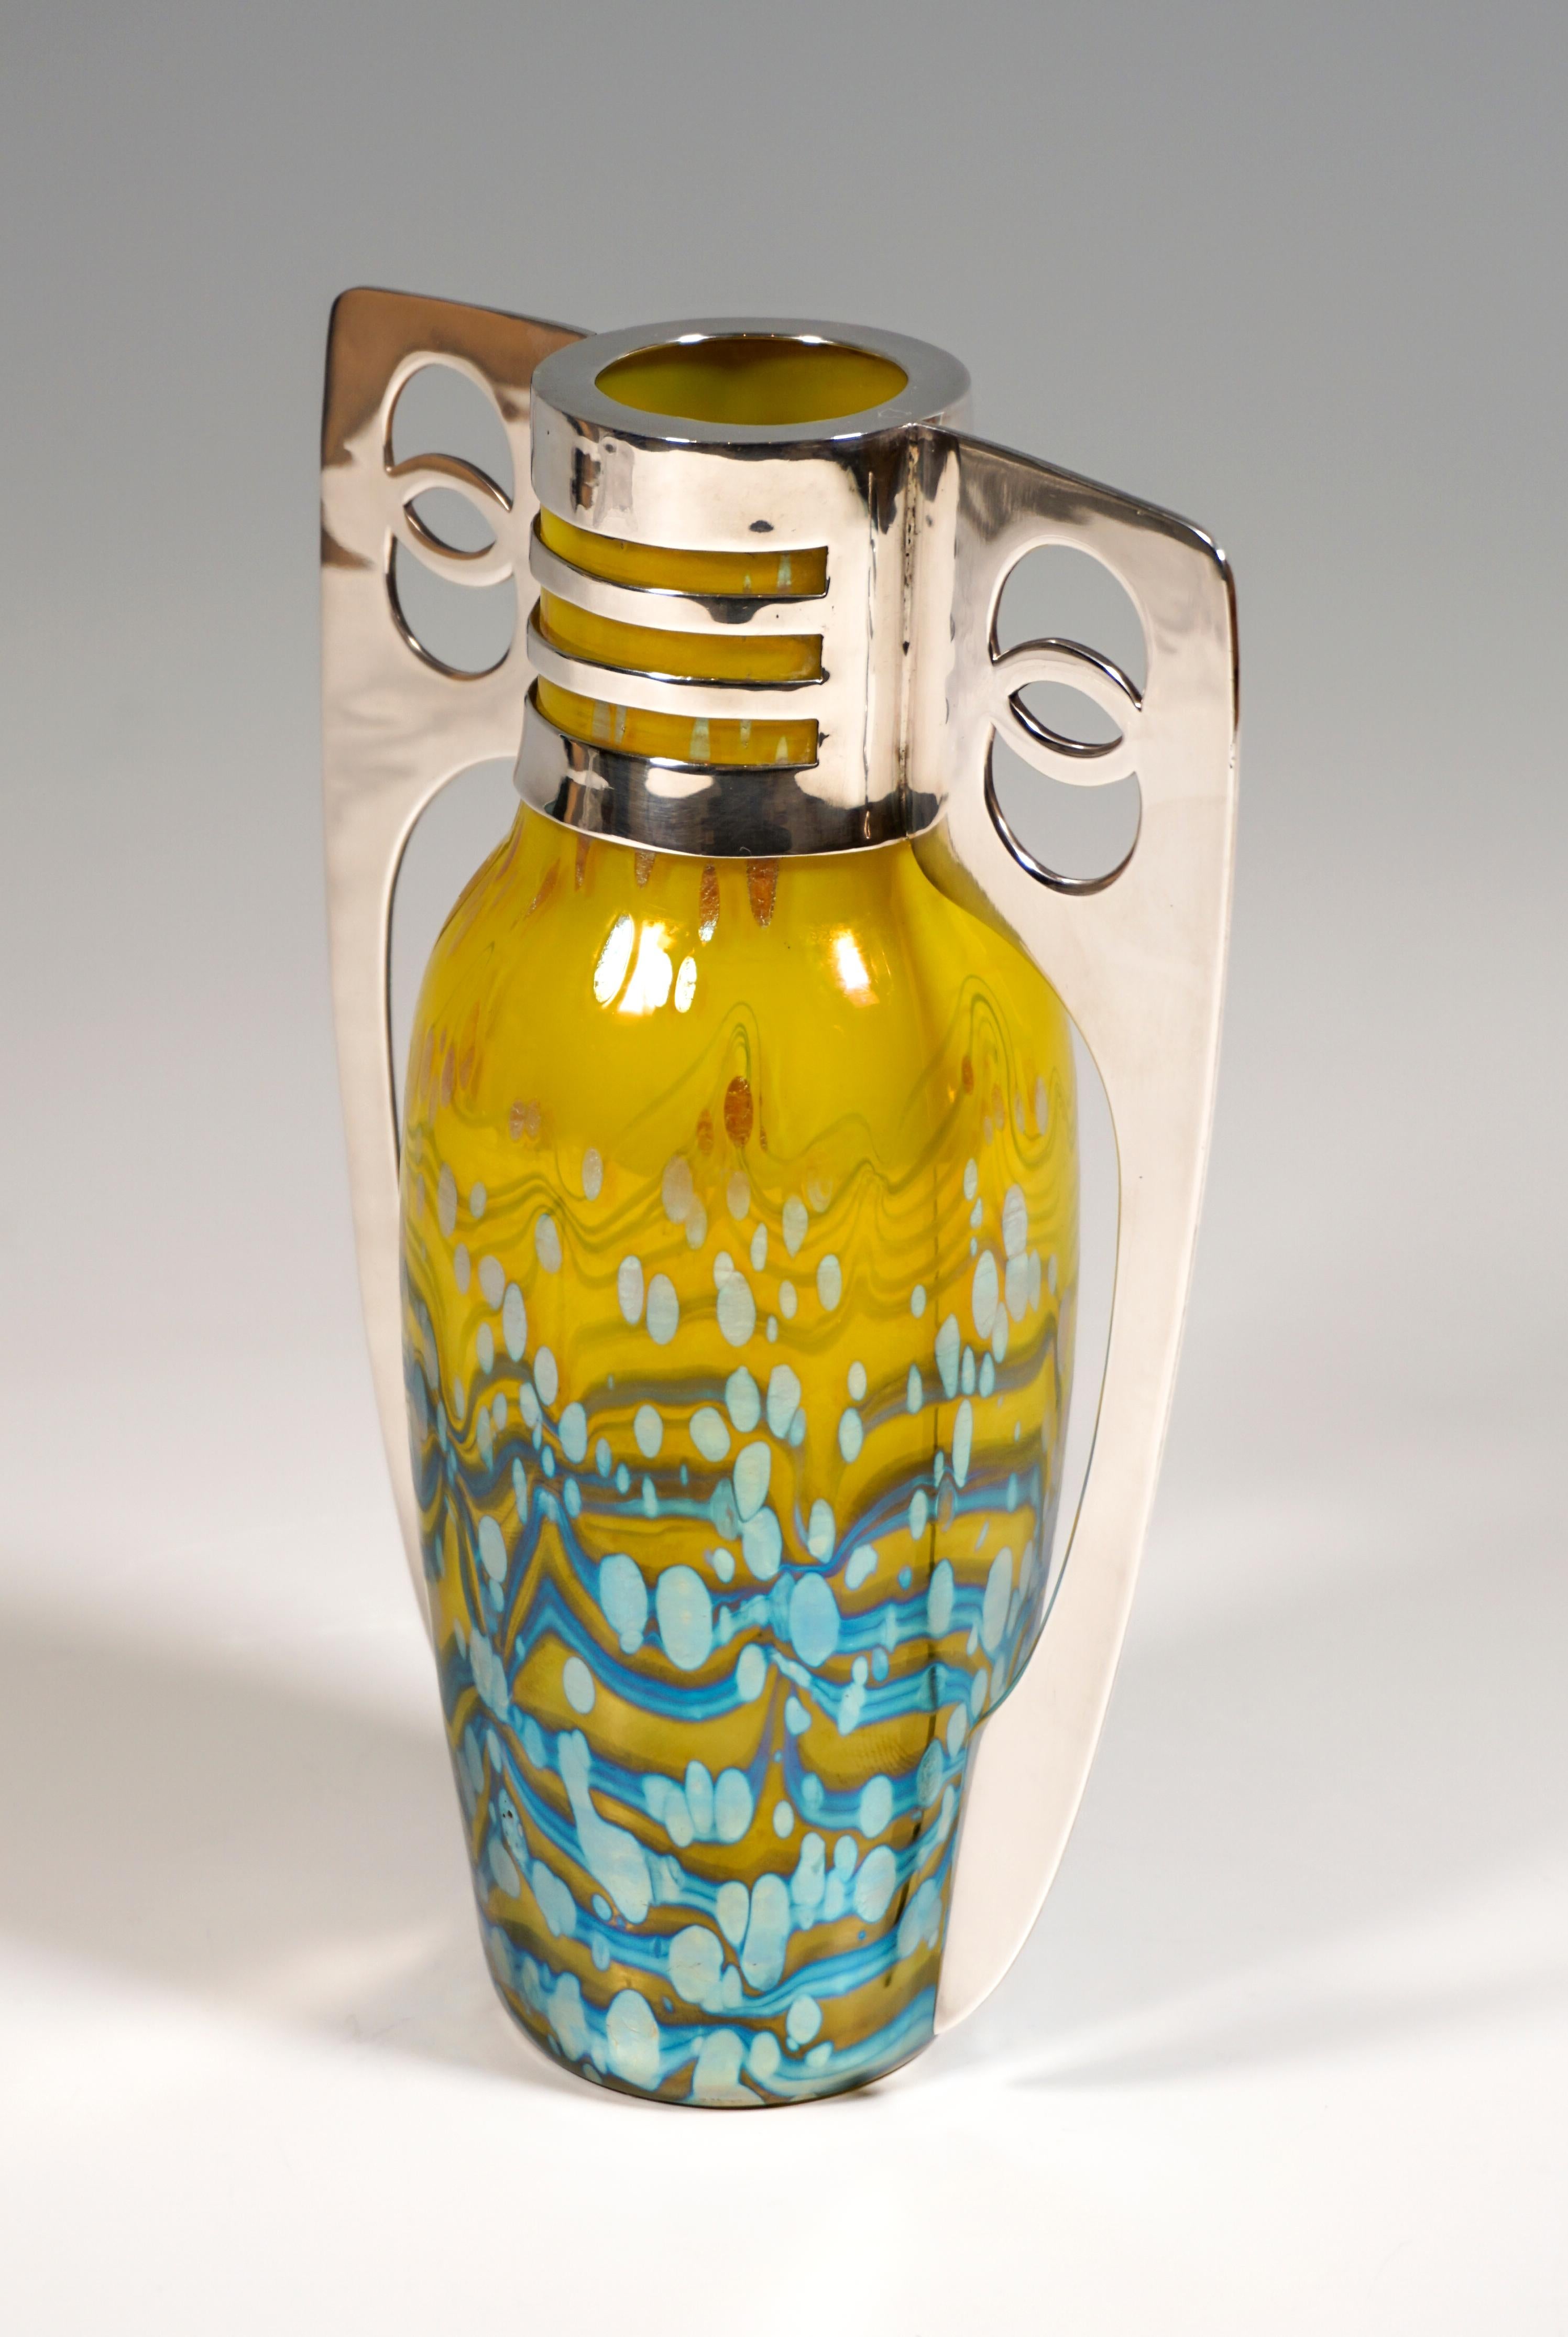 Hand-Crafted Loetz Art Nouveau Vase Lemon-Yellow Cytisus with Silver Mount, Austria-Hungary